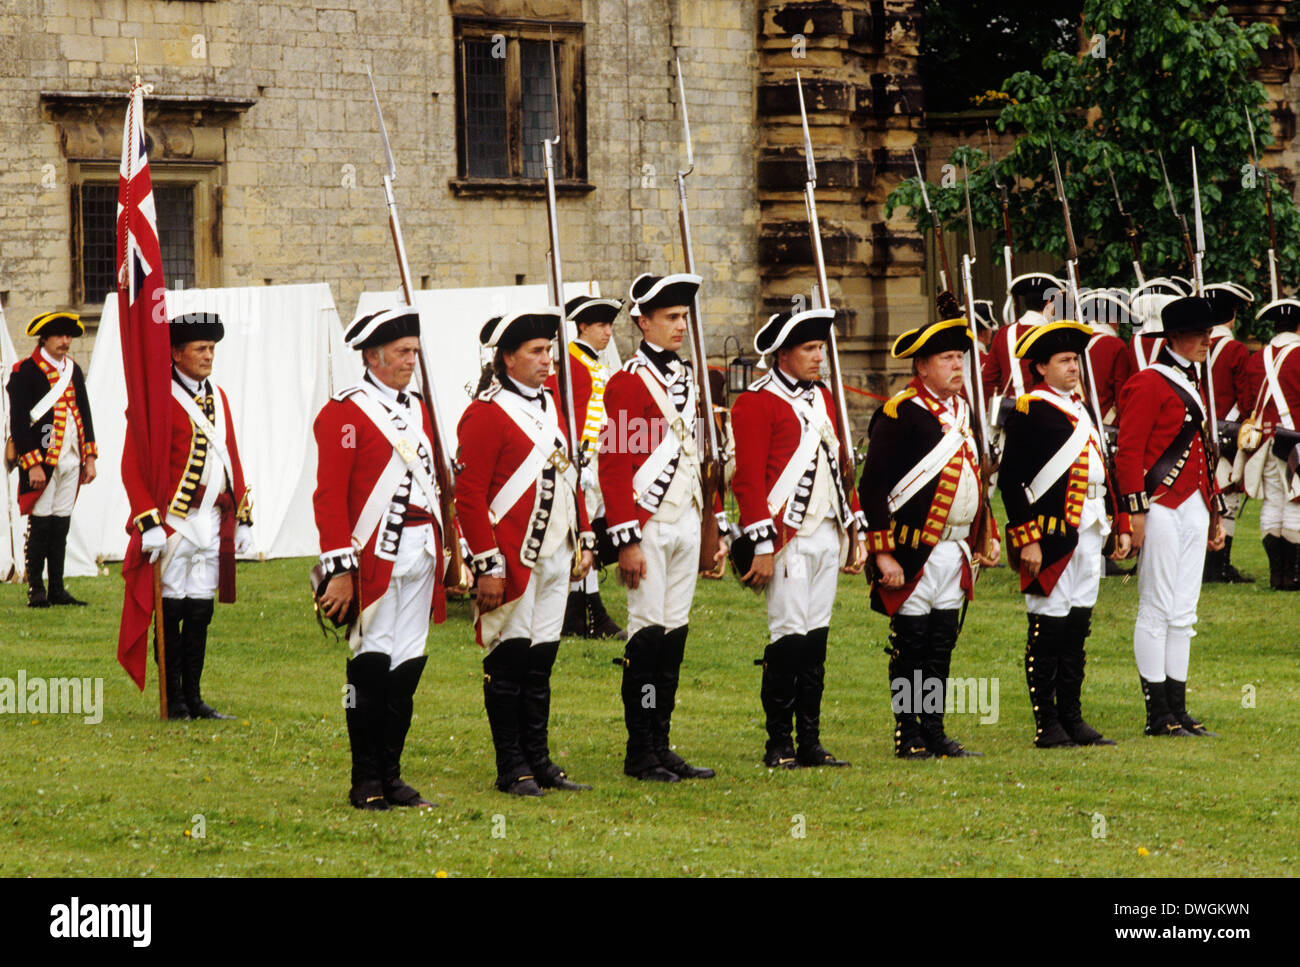 British soldiers, 1780, muskets with attached bayonets, historical re-enactment soldier English army uniform uniforms late 18th century England UK musket redcoats Stock Photo